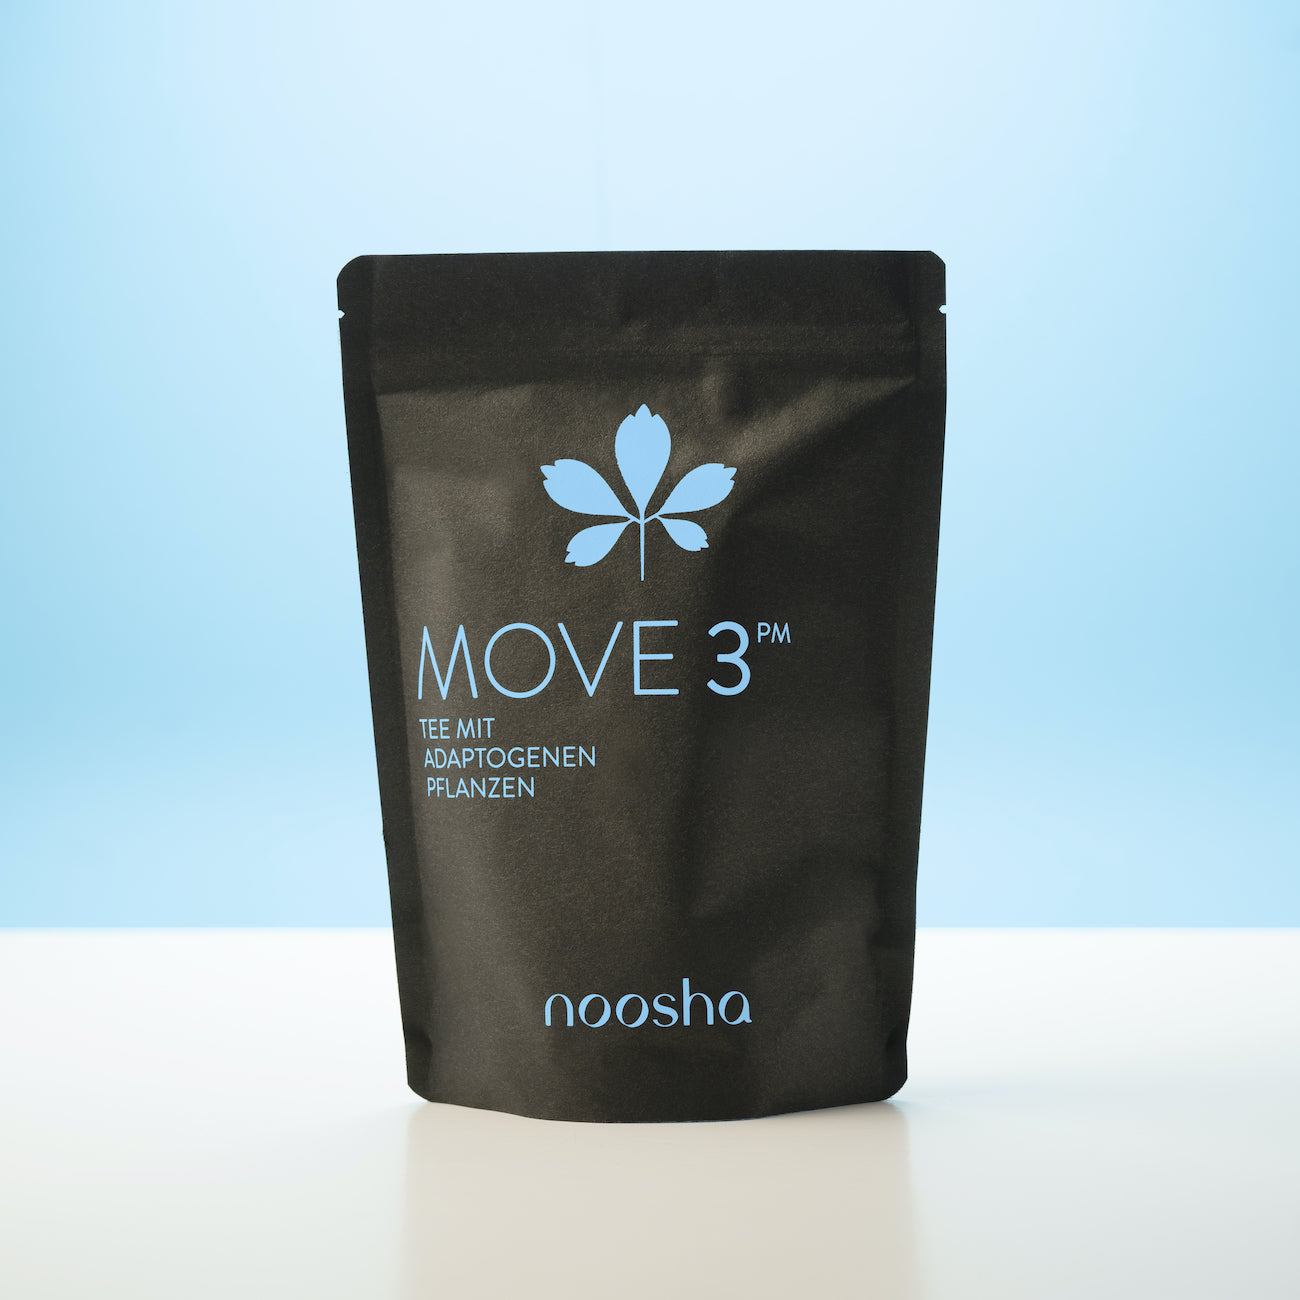  Packaging of MOVE 3PM tea made by noosha